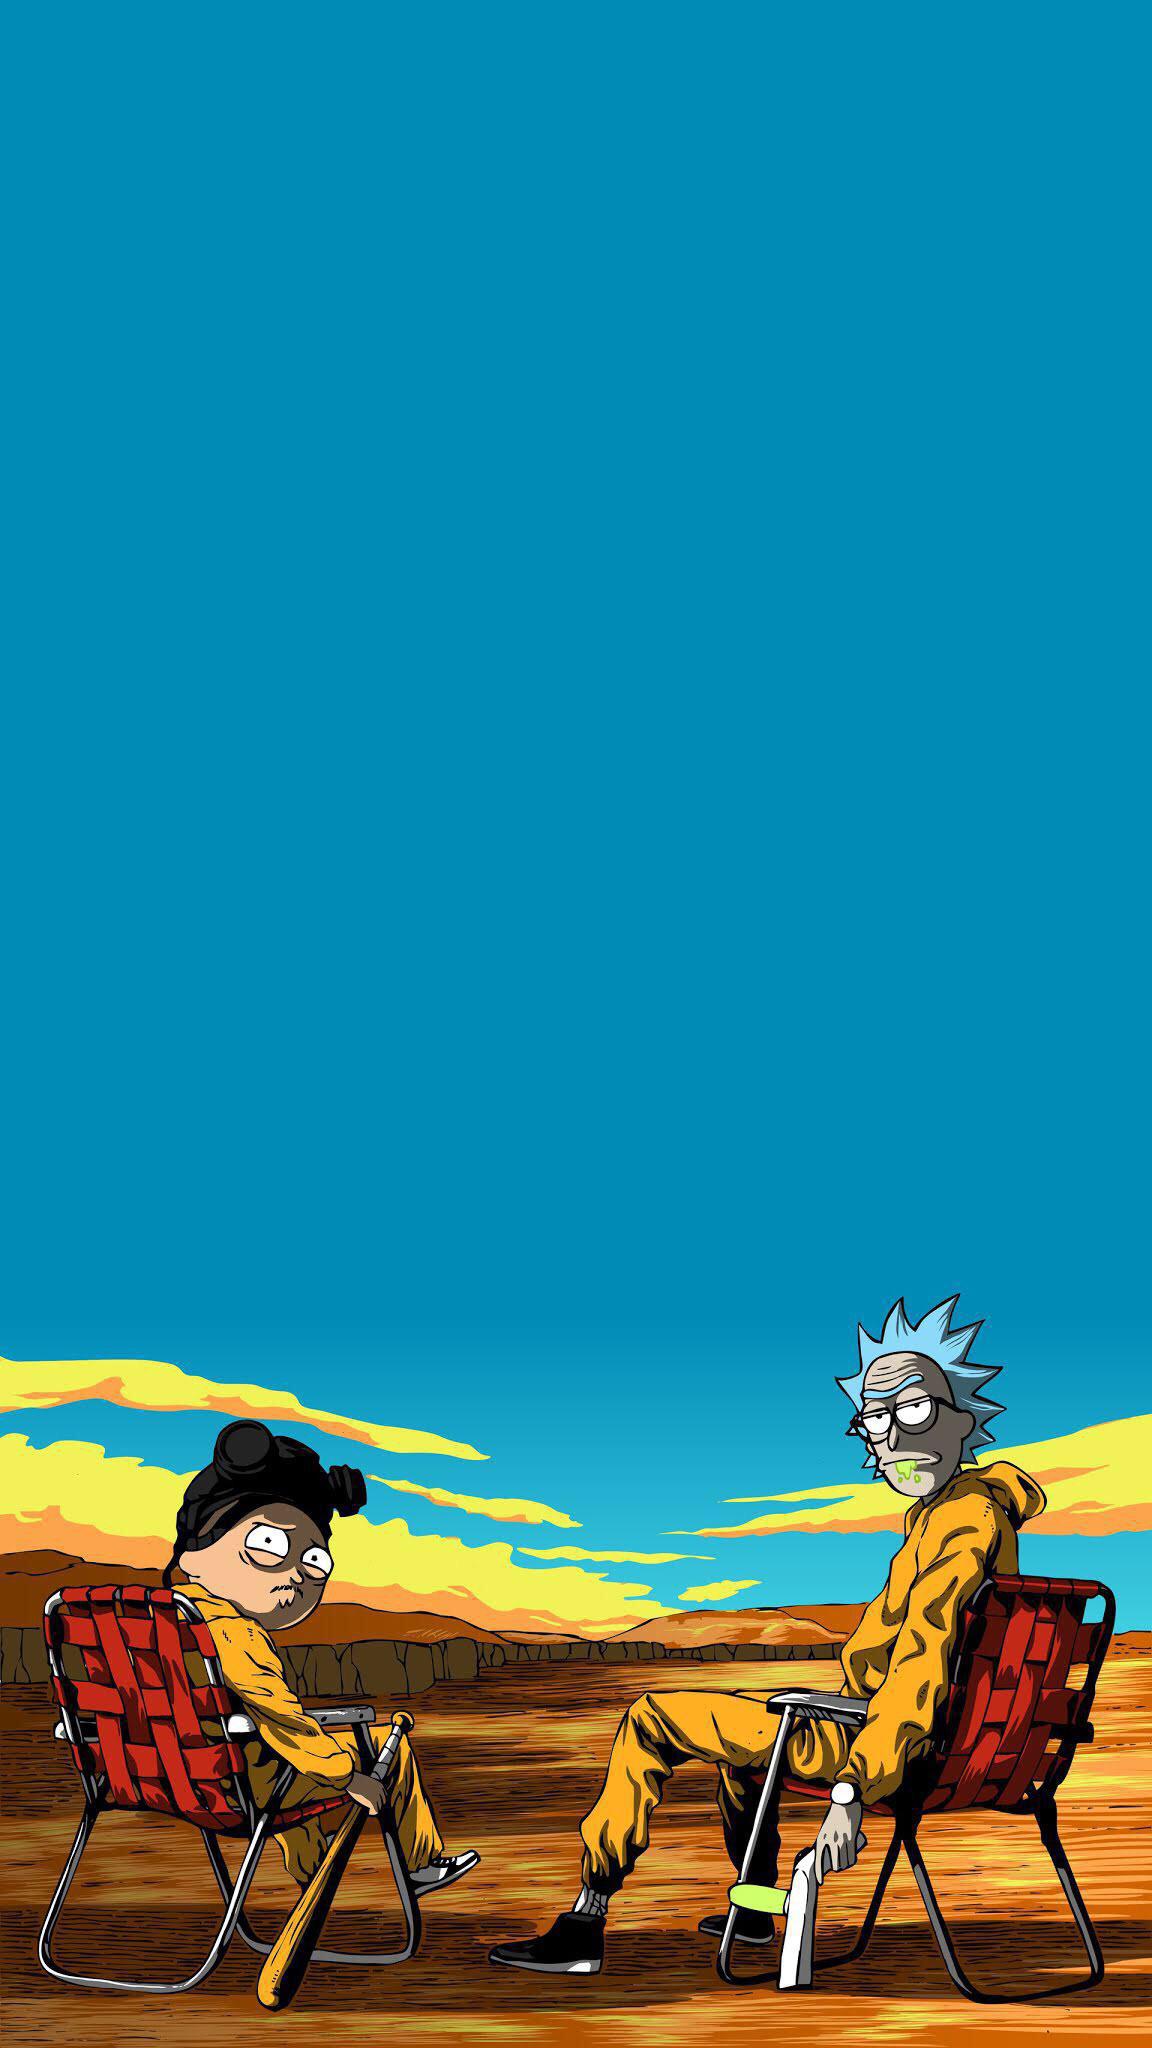 Rick and morty riphonewallpapers